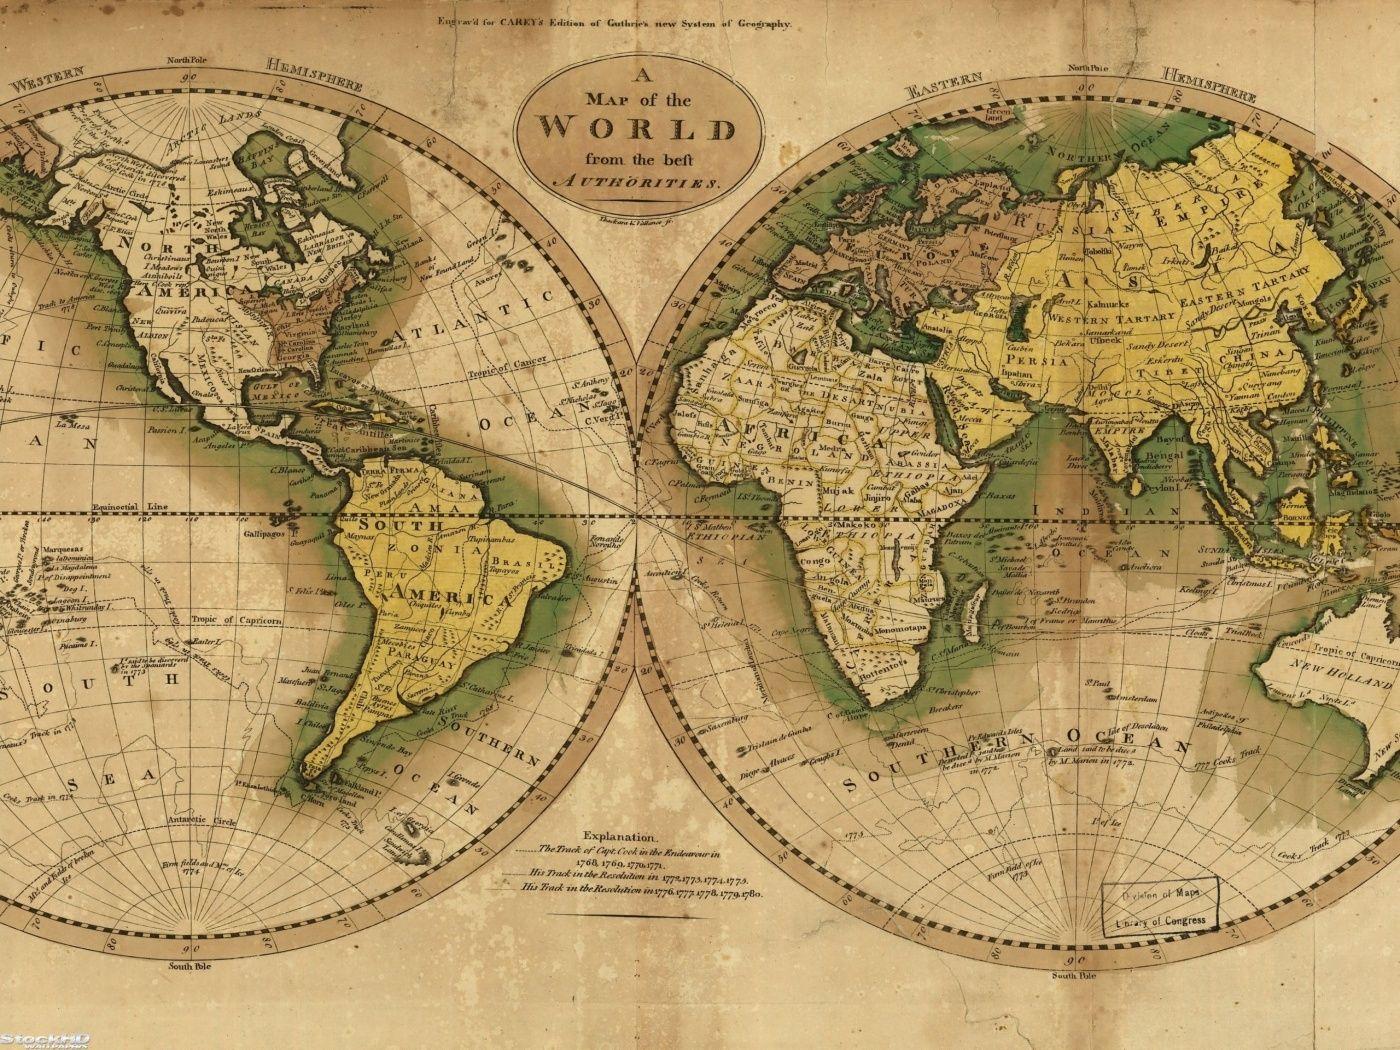 maps world map cartography HD - Image And Wallpaper free